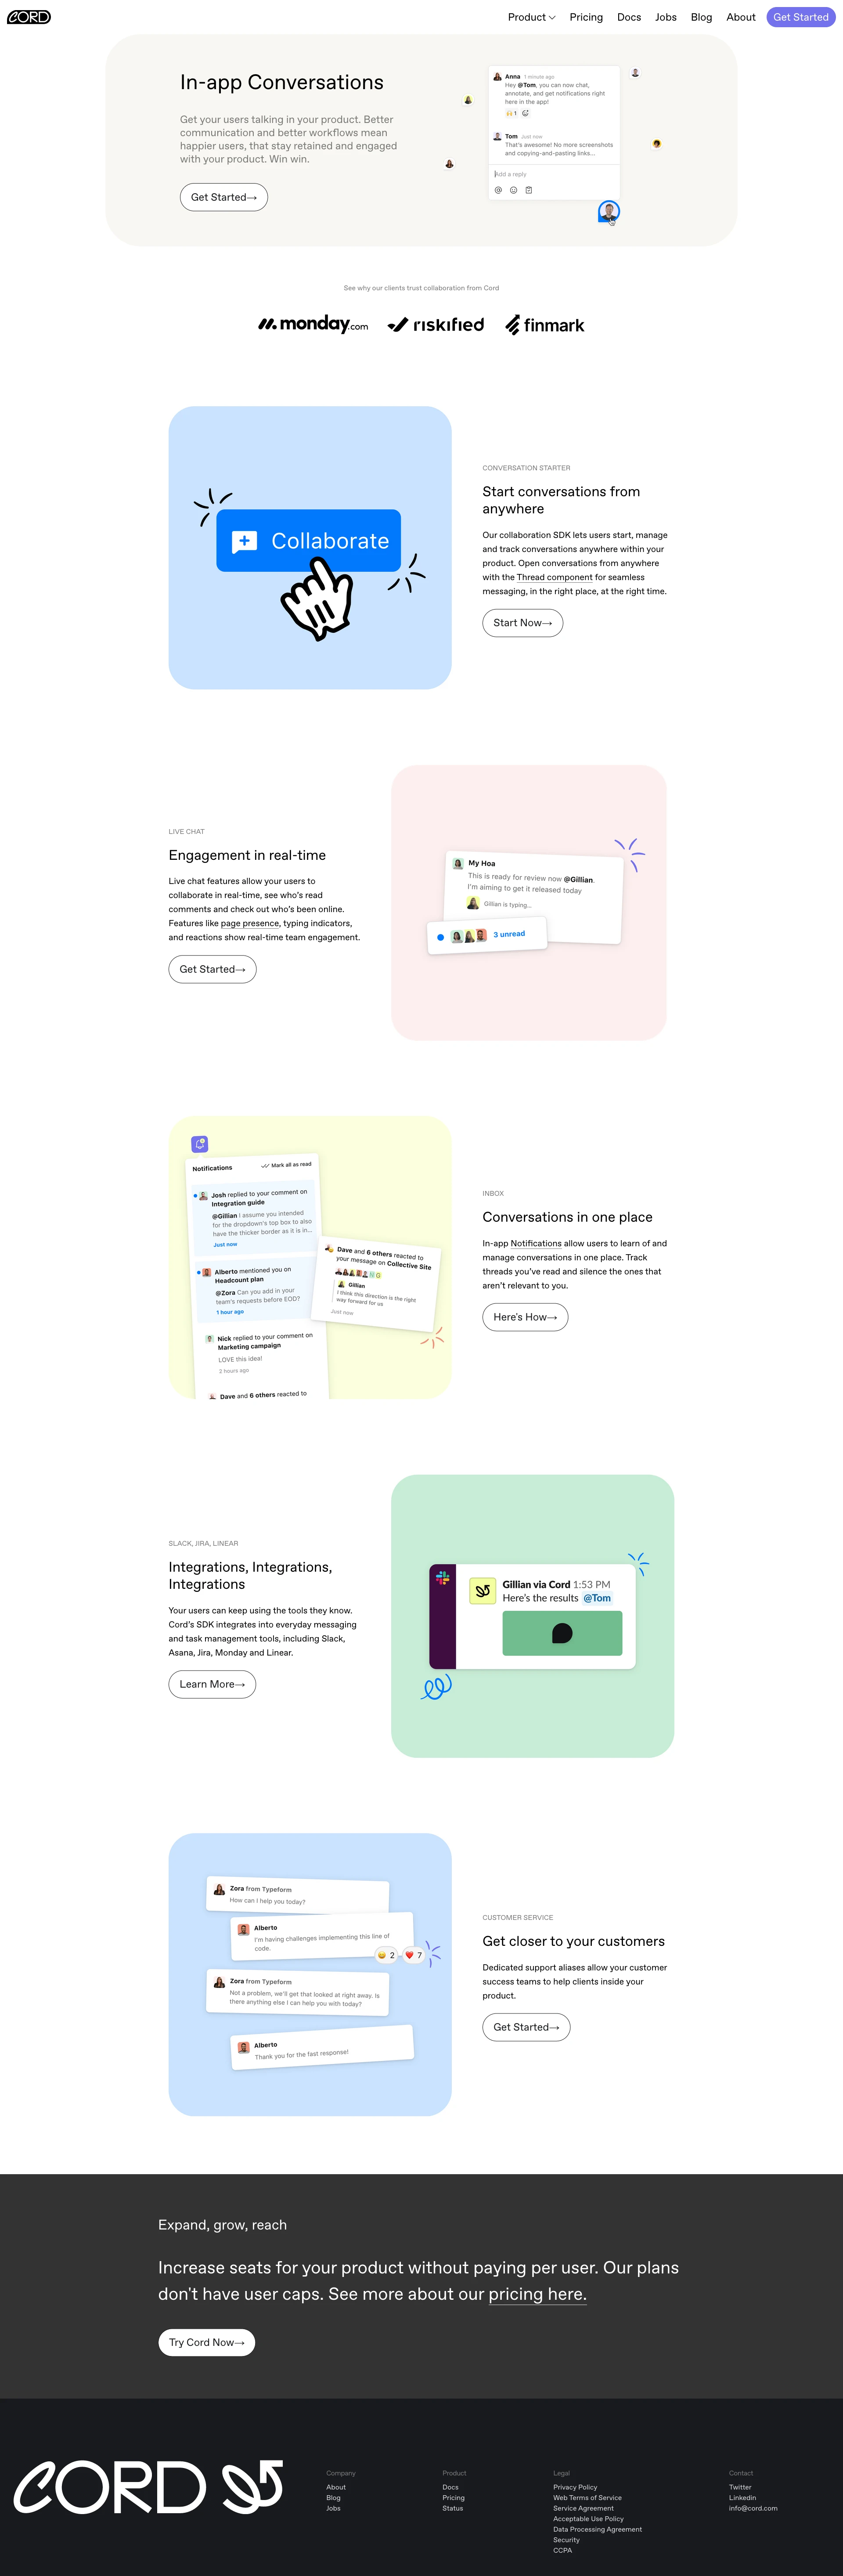 Cord Landing Page Example: Get teams talking in your product. Add collaboration to your product in under an hour. Our SDK helps you re-imagine your app with a rich, real-time collaboration experience - in minutes, not months.